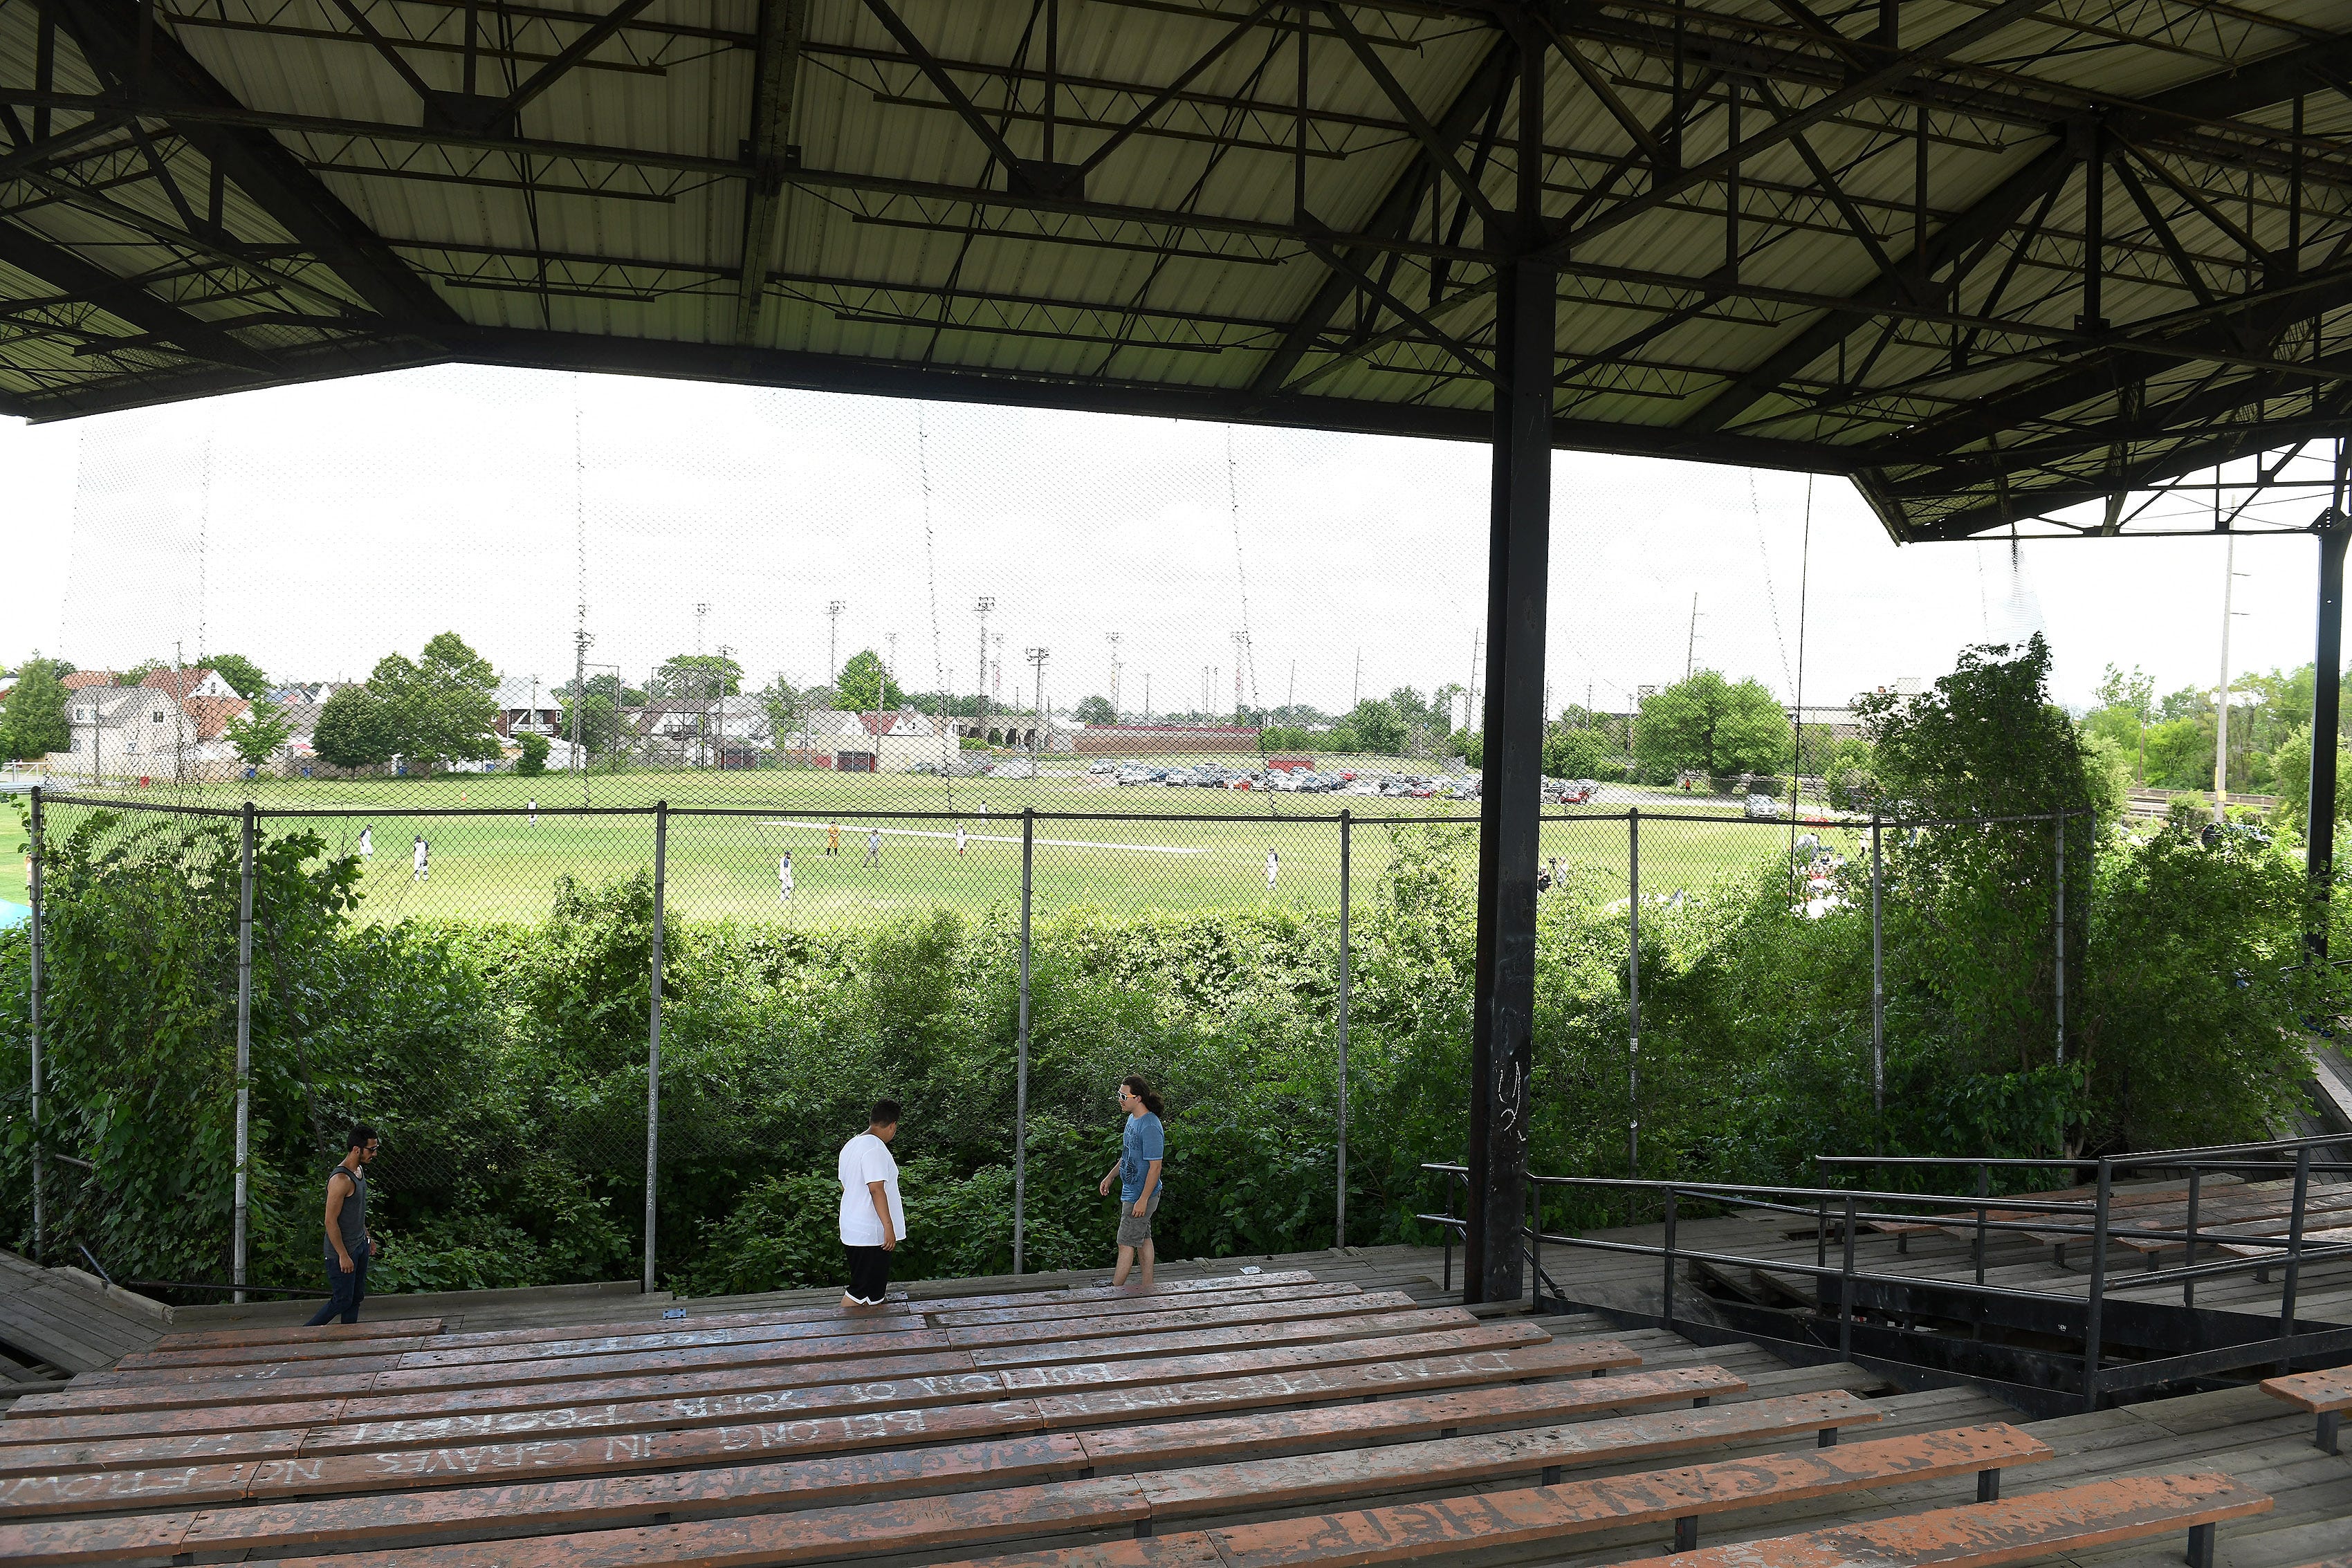 People check out the stands of Historic Hamtramck Stadium during a sandlot style baseball game.